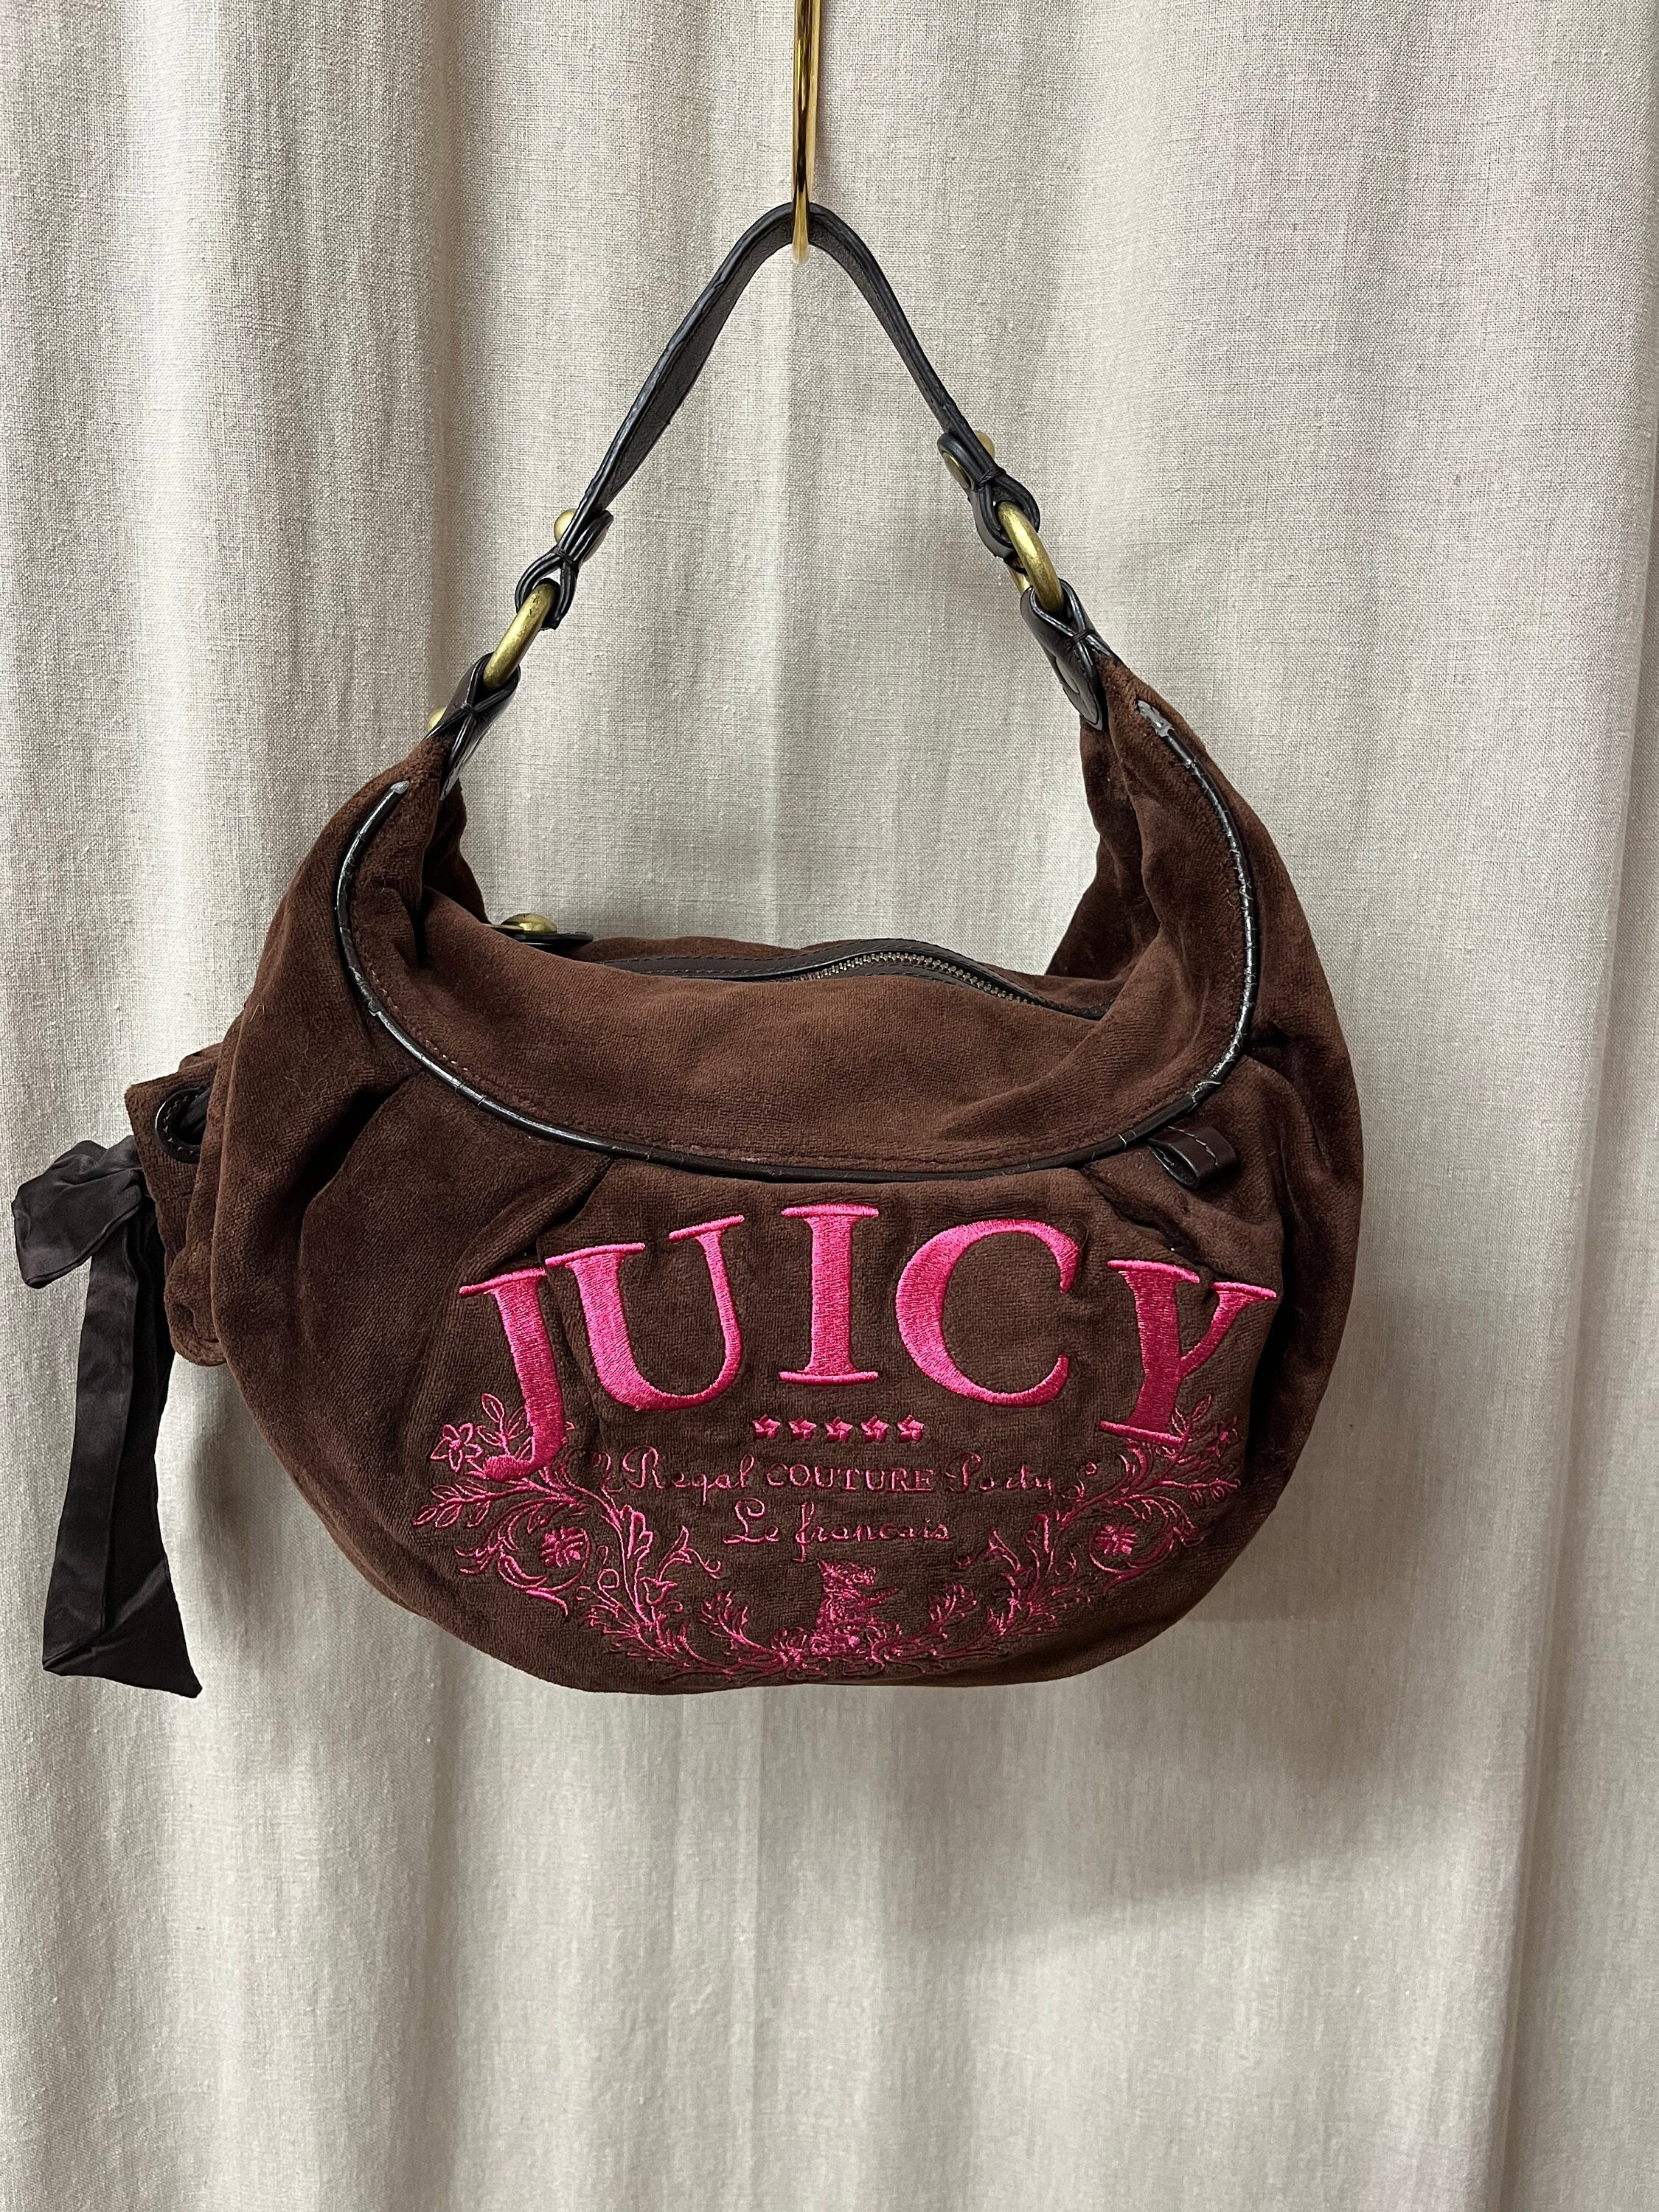 Juicy couture bags — Holy Thrift